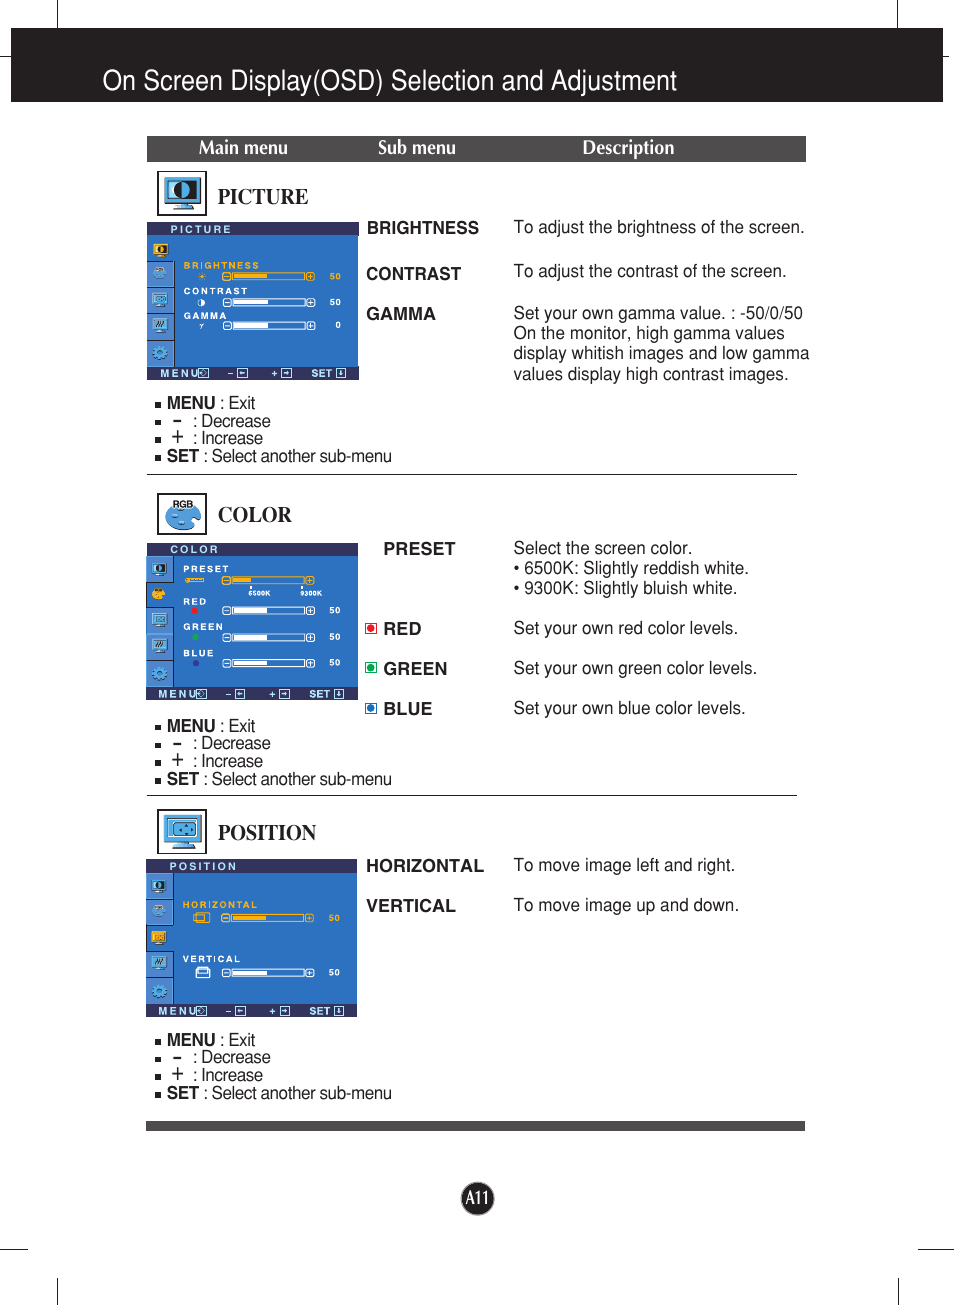 Picture, Color, Position | On screen display(osd) selection and adjustment | LG L1717S User Manual | Page 12 / 20